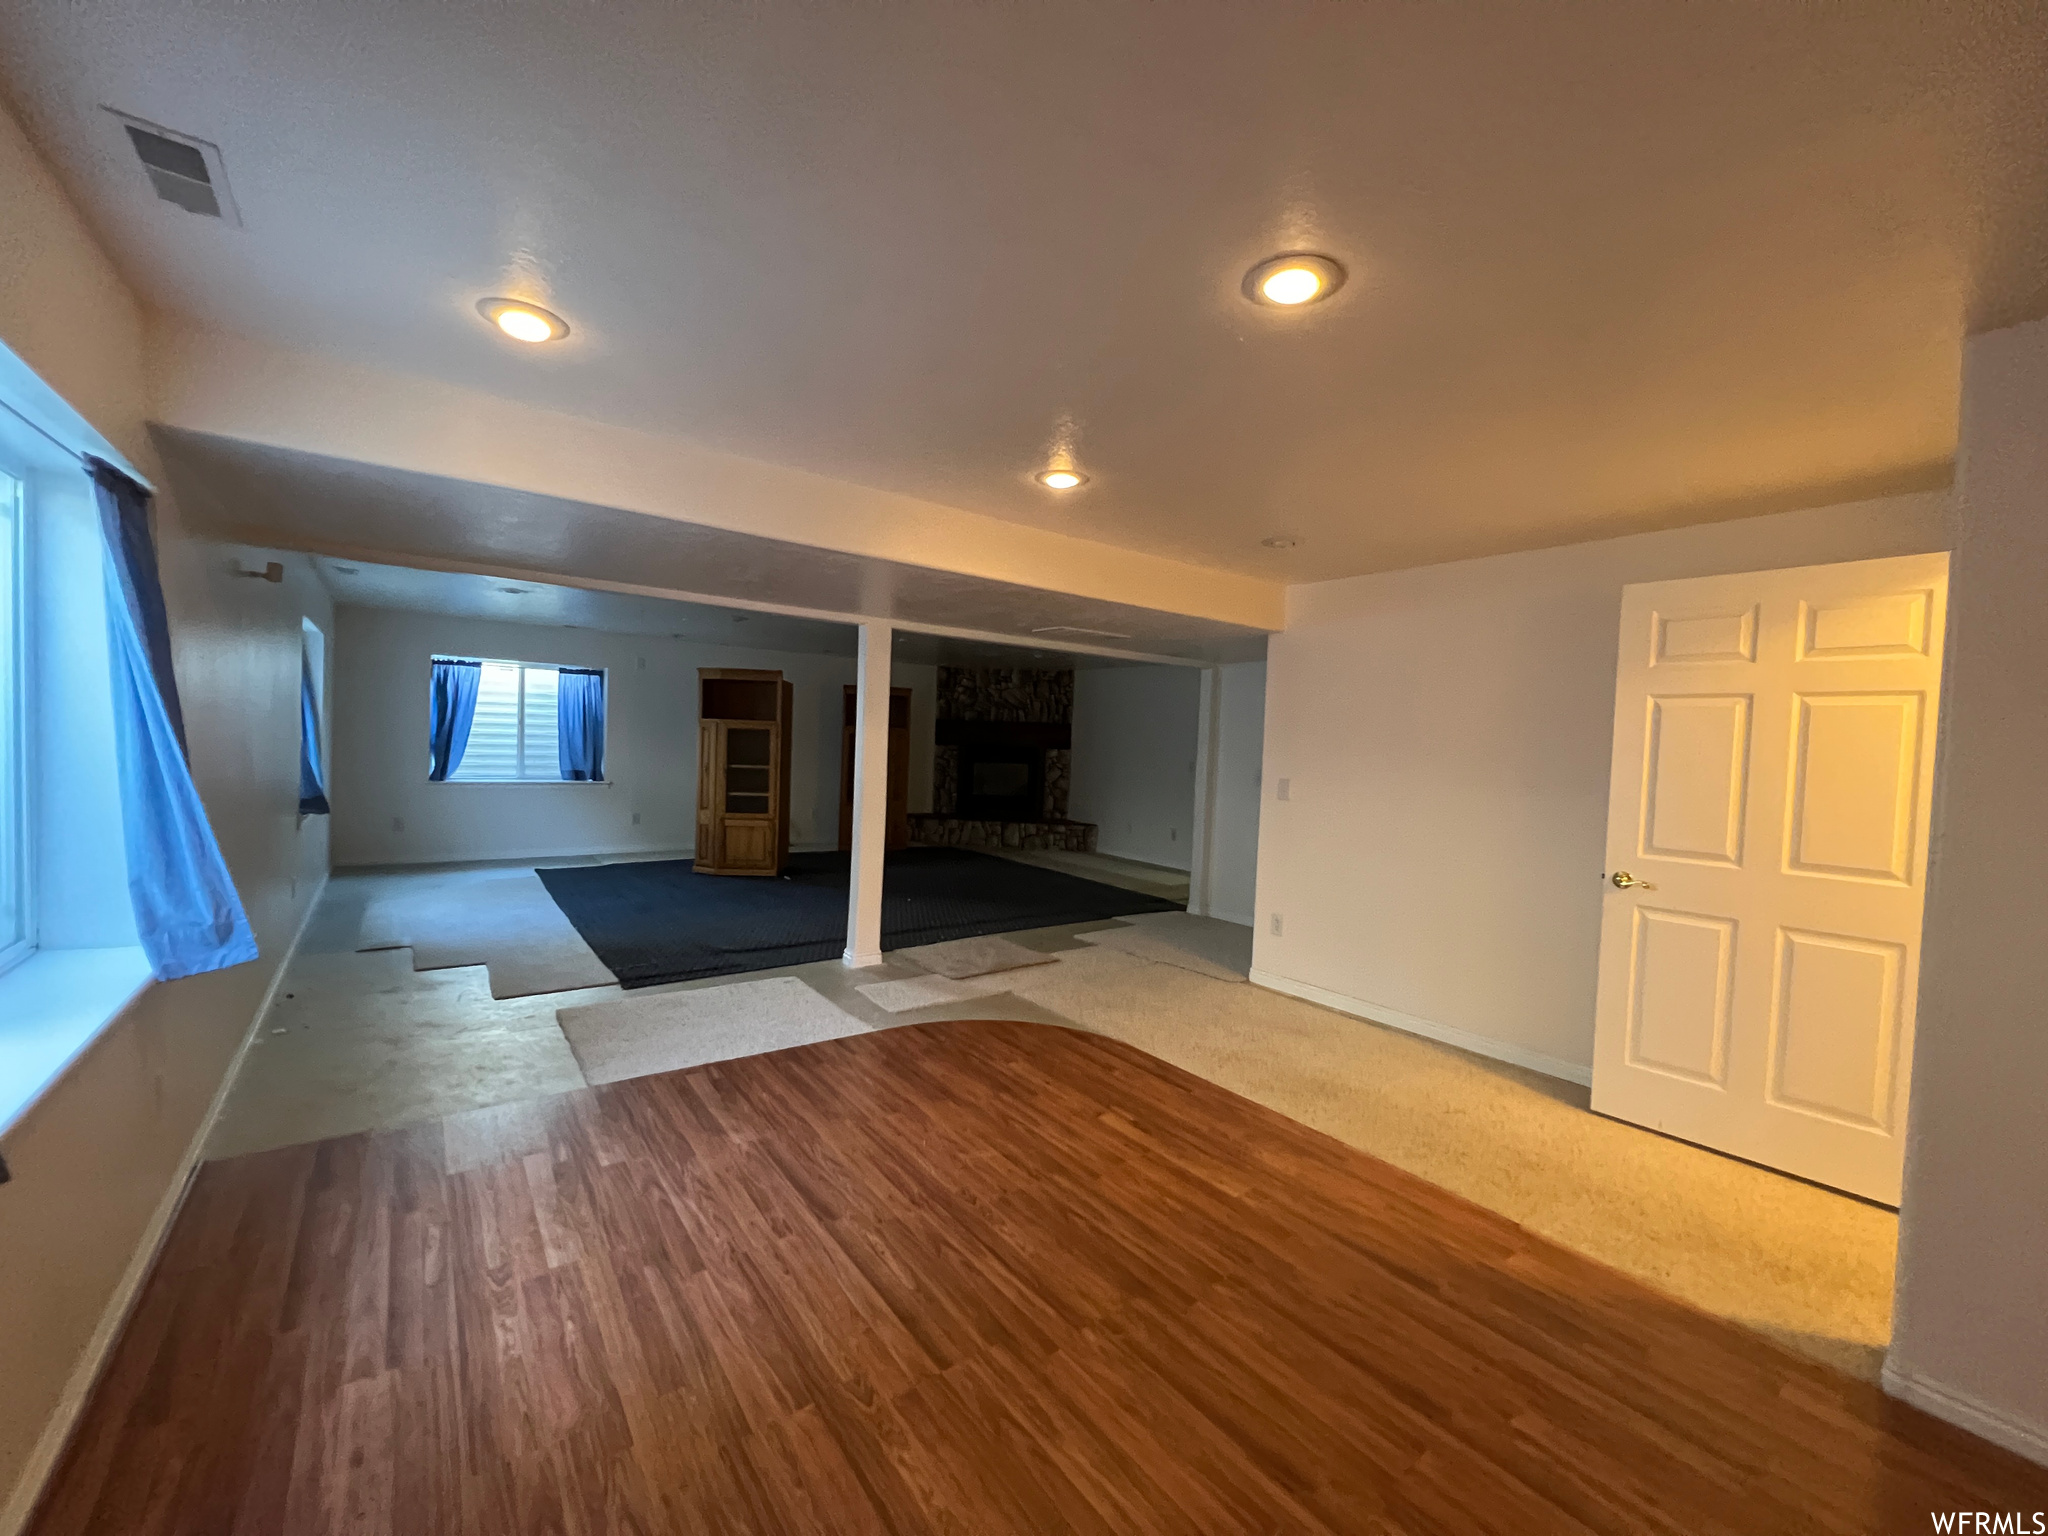 Hardwood floored living room featuring a fireplace